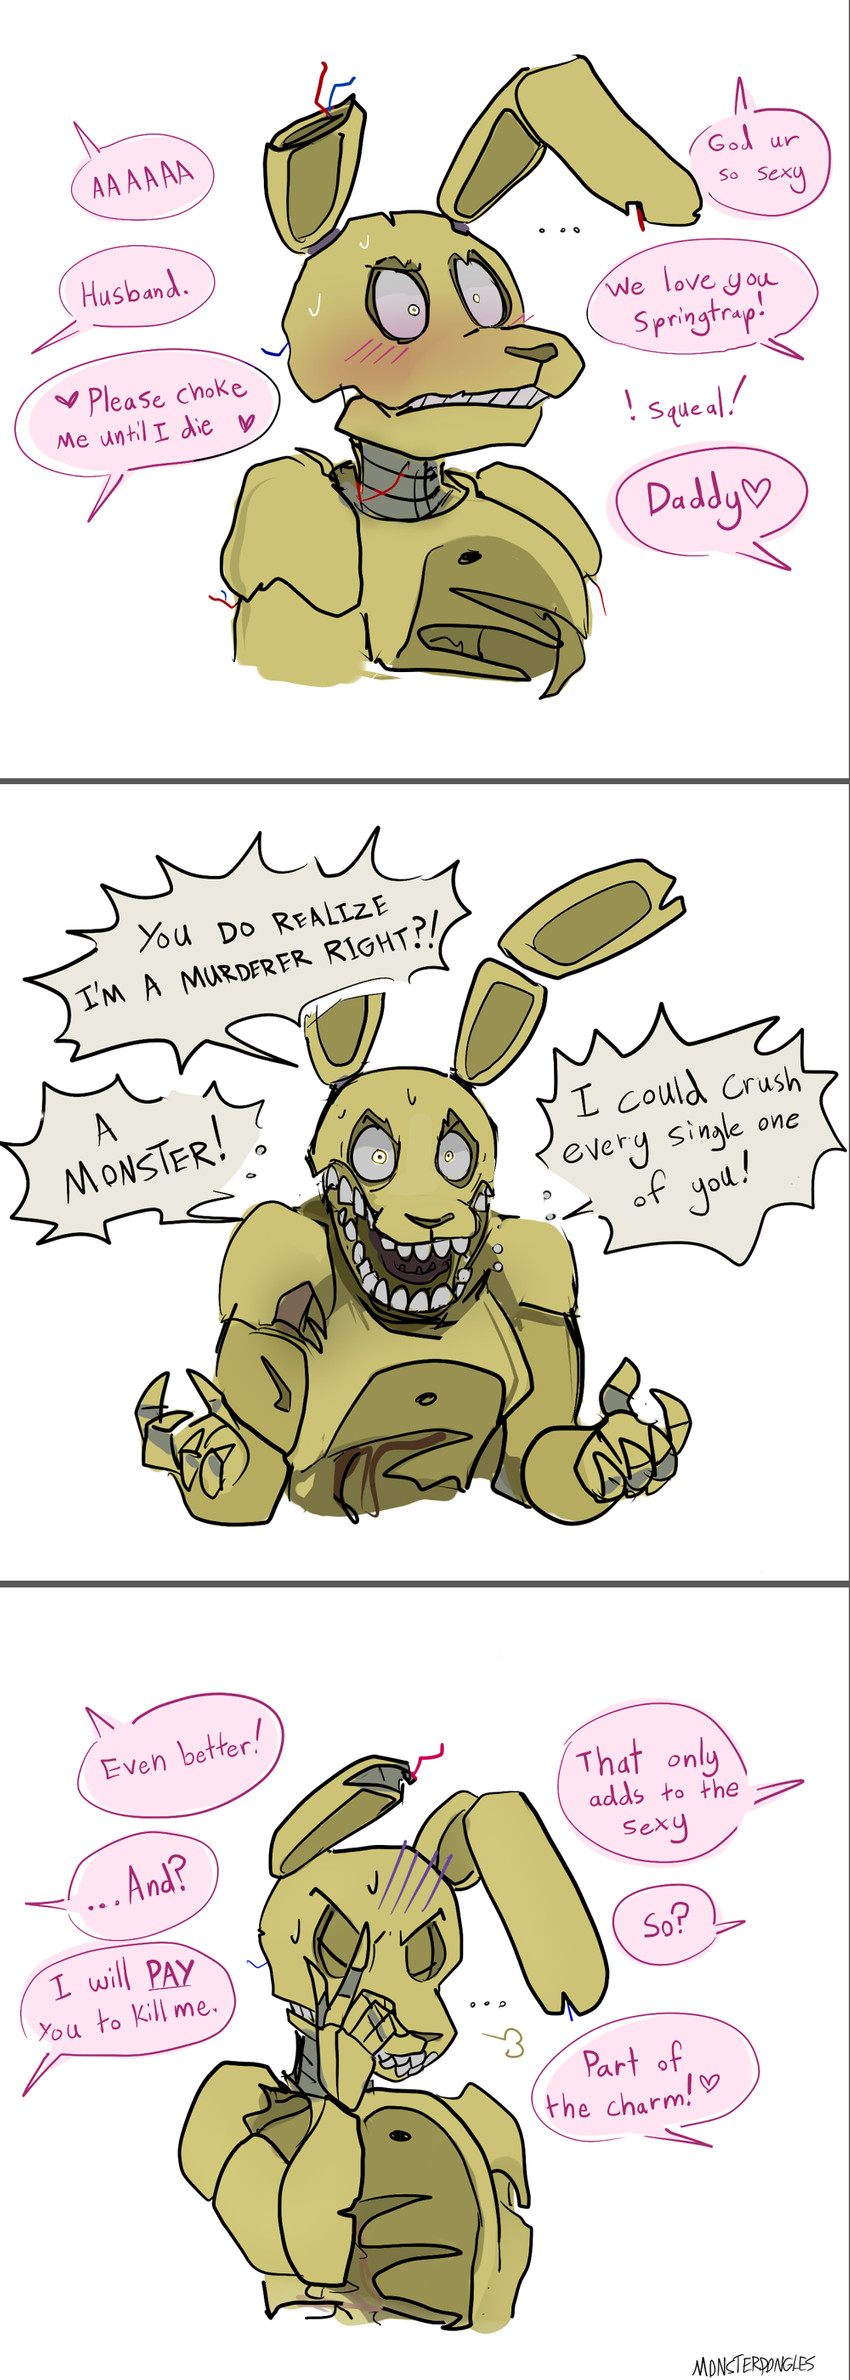 springtrap (five nights at freddy's 3 and etc) created by monsterdongles